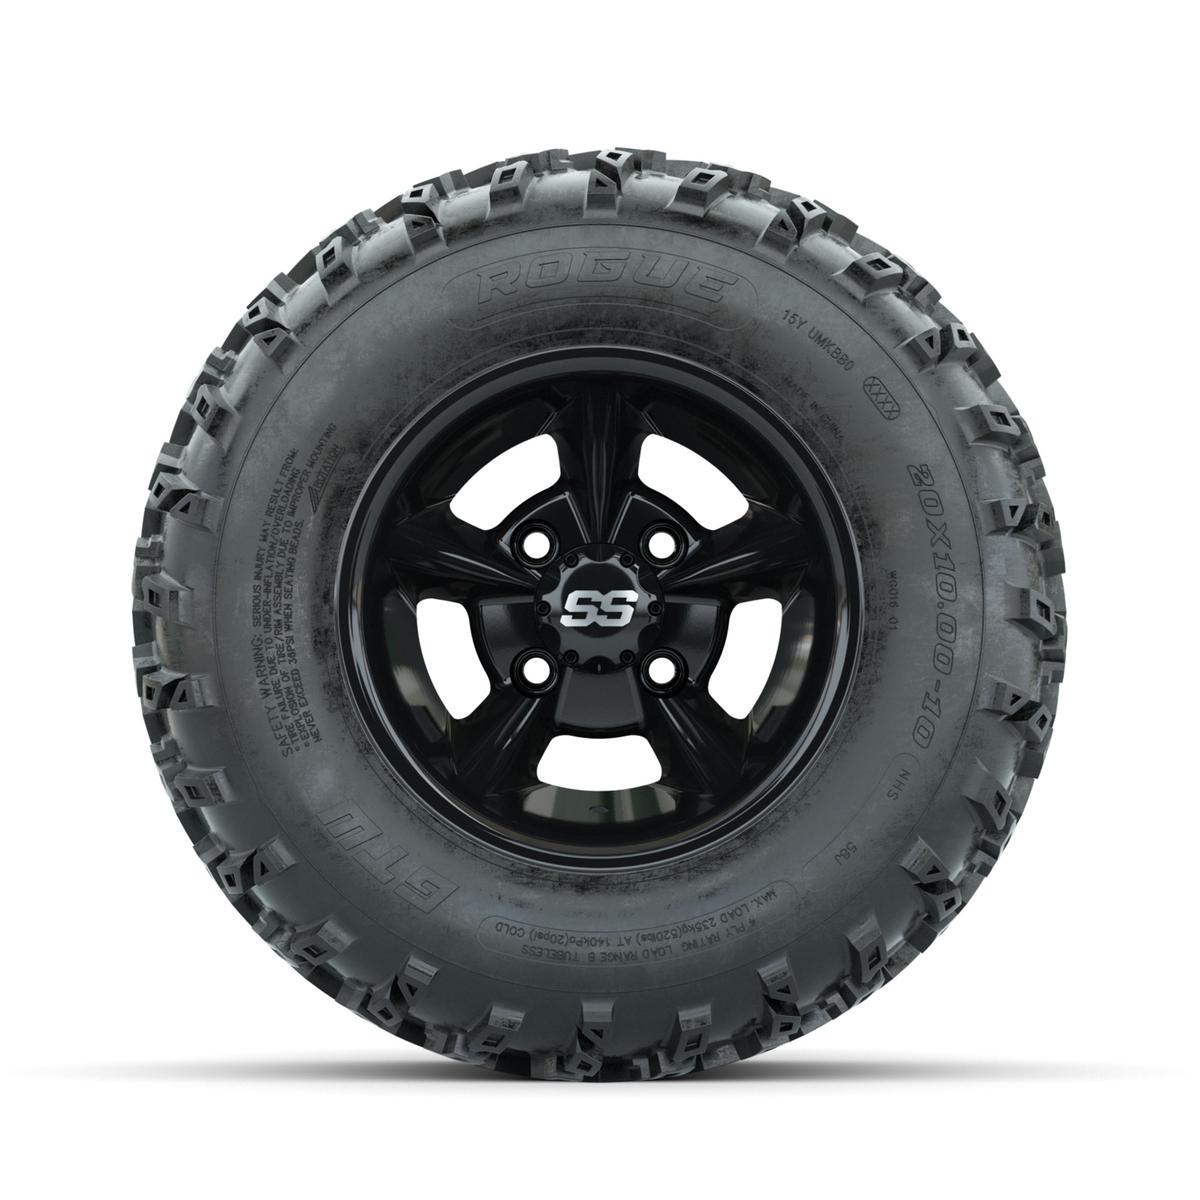 GTW Godfather Black 10 in Wheels with 20x10.00-10 Rogue All Terrain Tires – Full Set